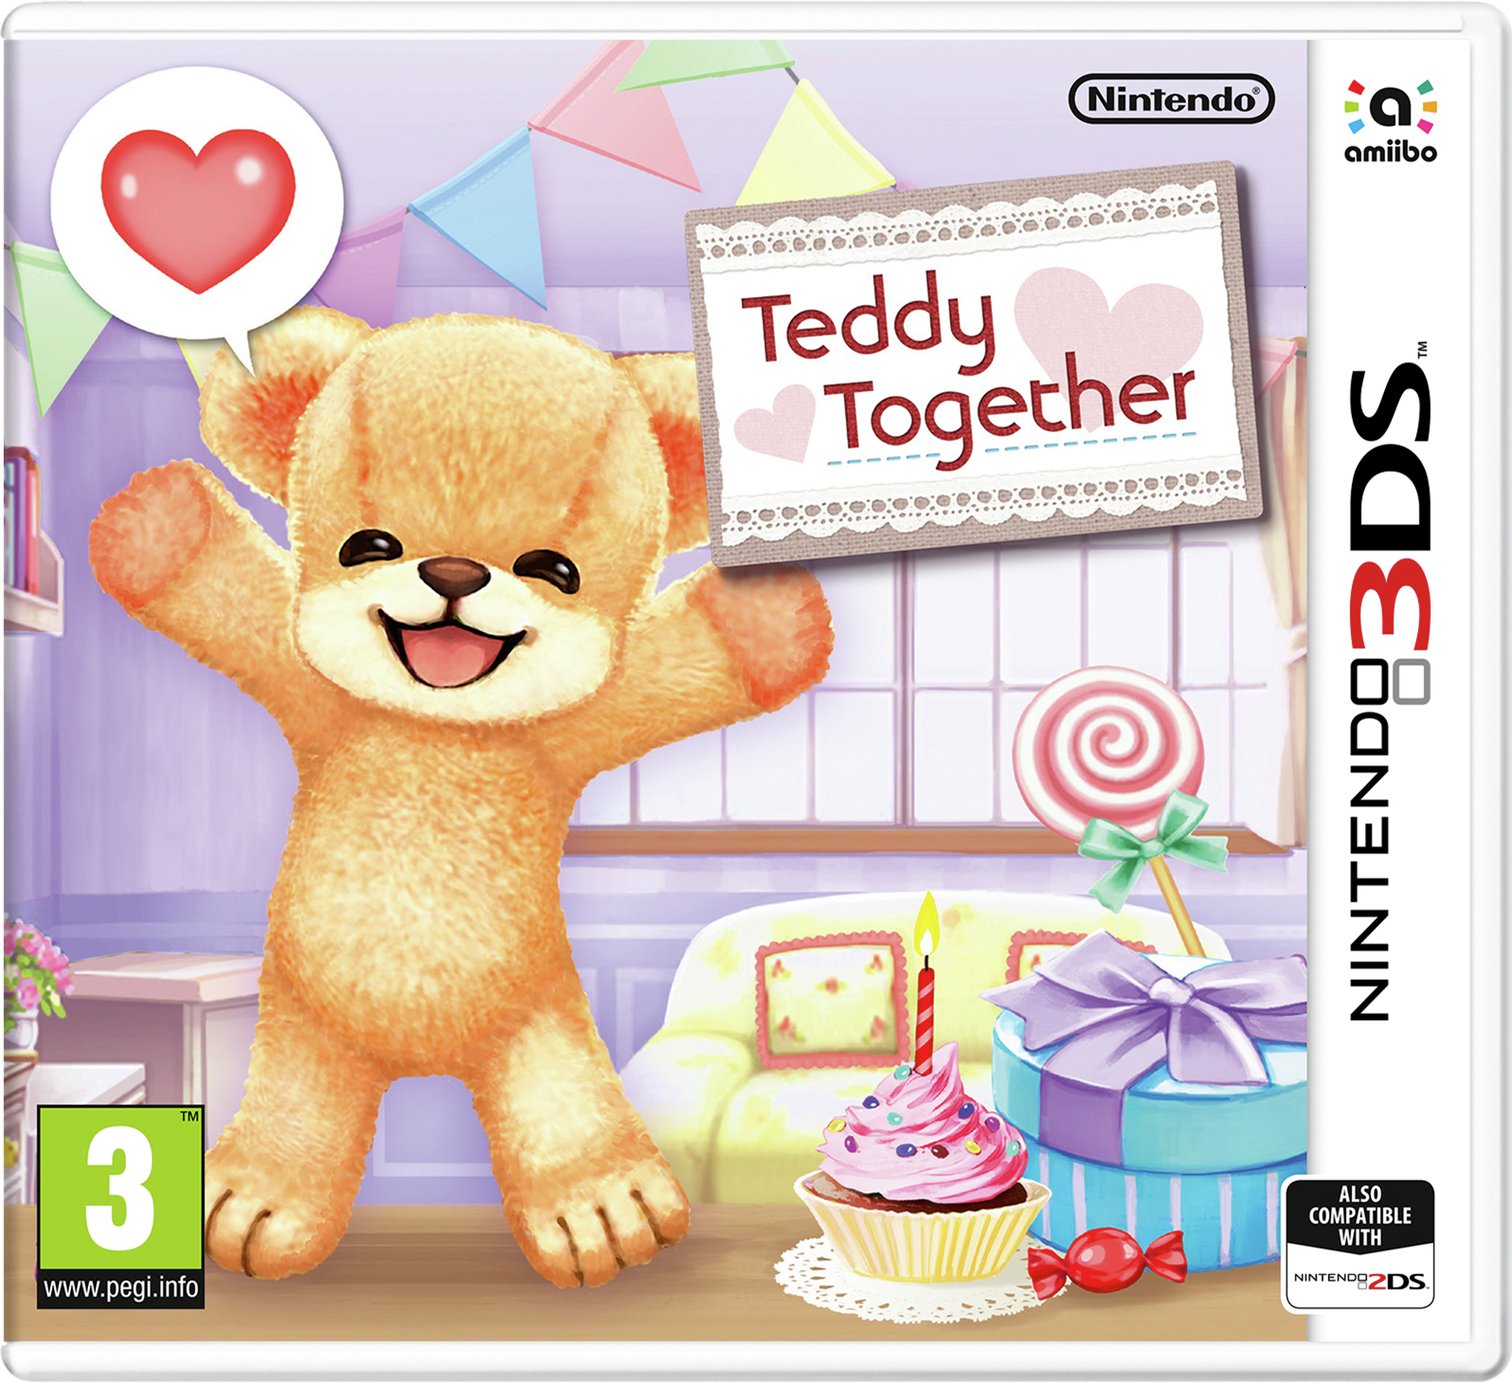 Teddy Together Nintendo 3DS Game Review